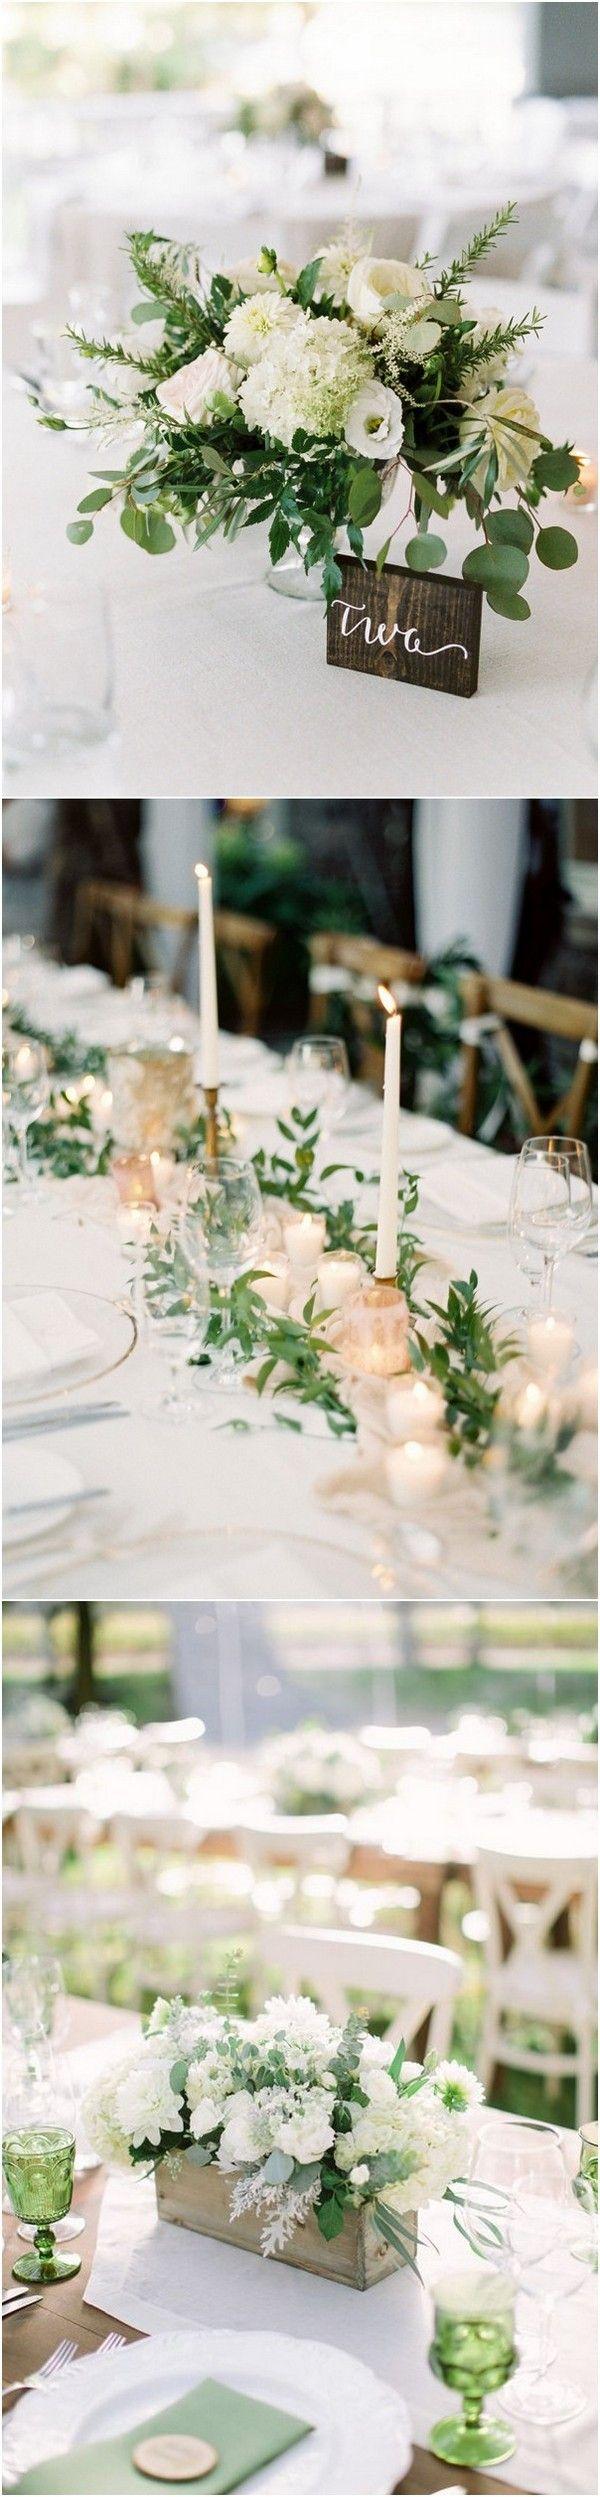 Свадьба - Trending-20 Chic White And Green Wedding Centerpiece Ideas - Page 2 Of 3